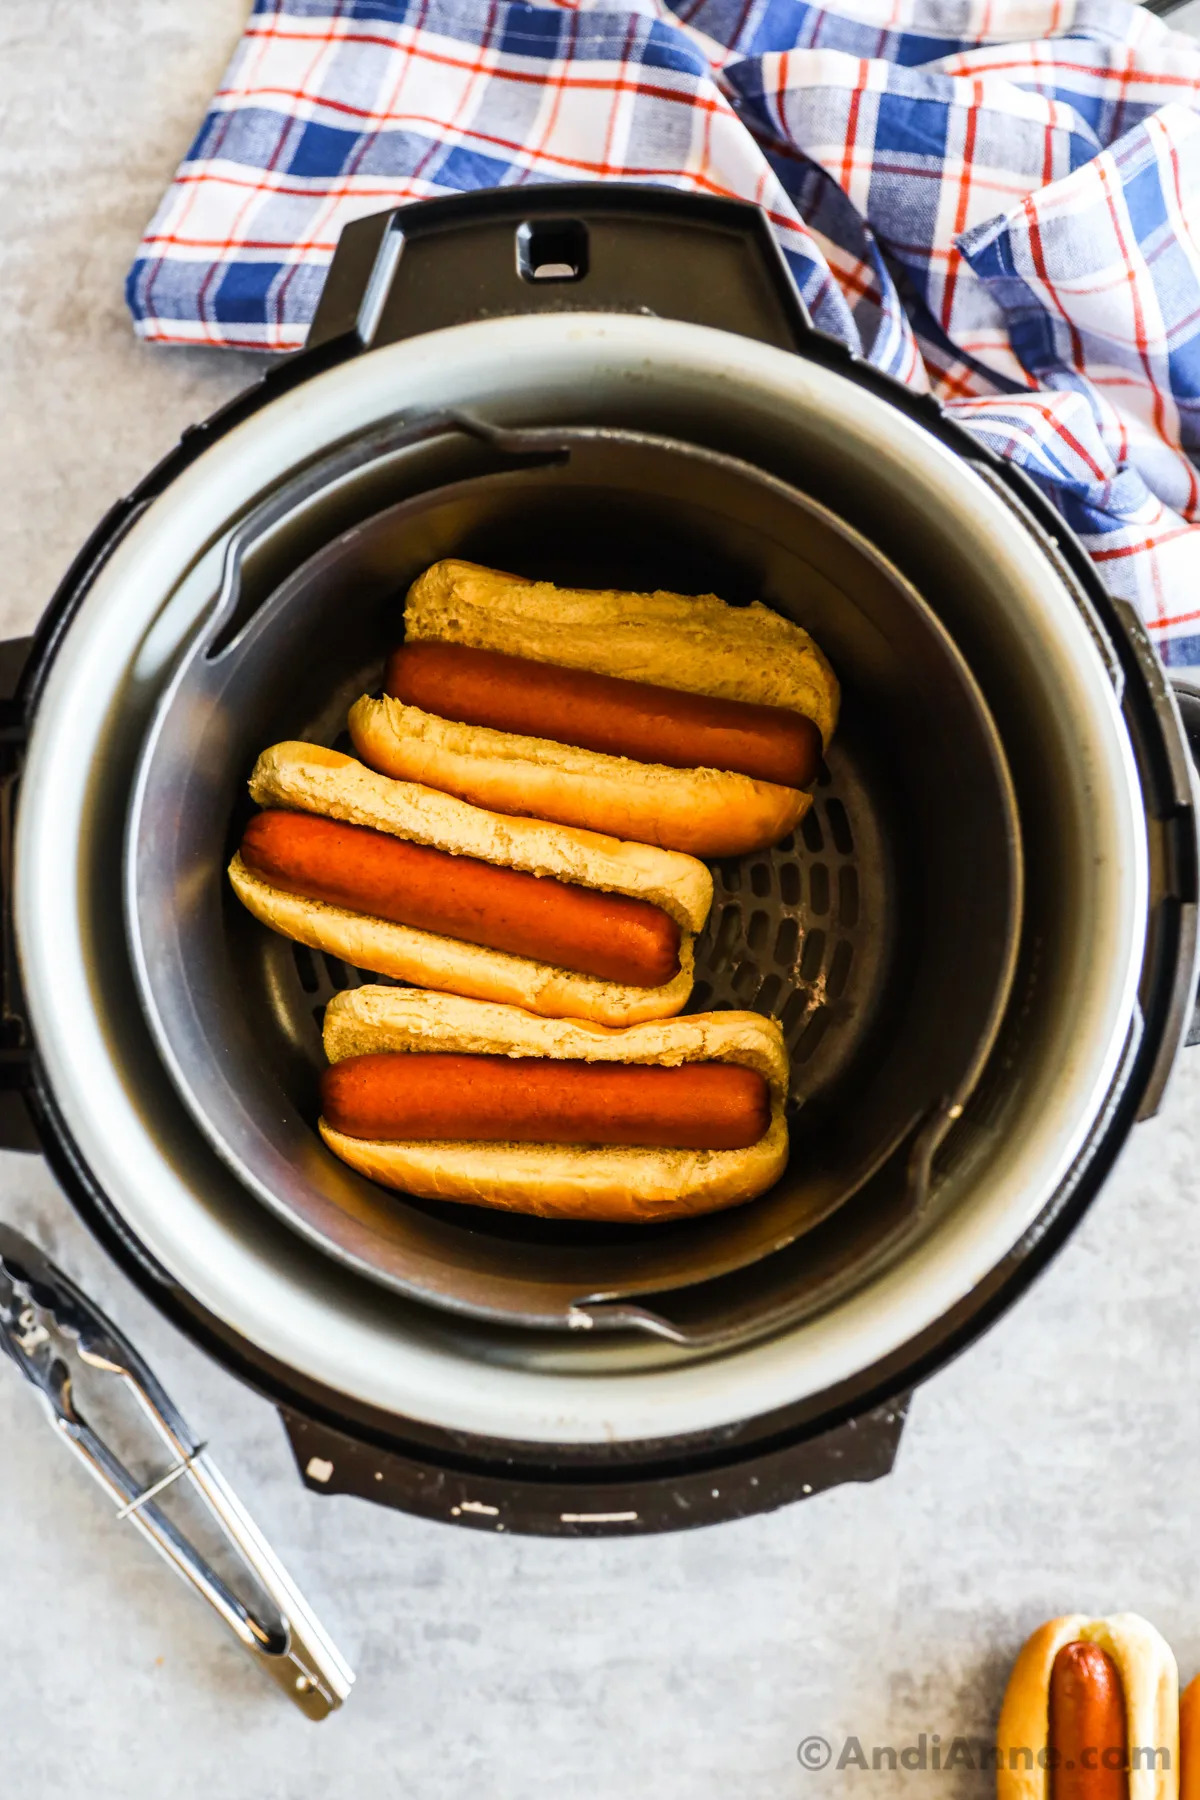 Looking into an air fryer with three hot dogs with buns.